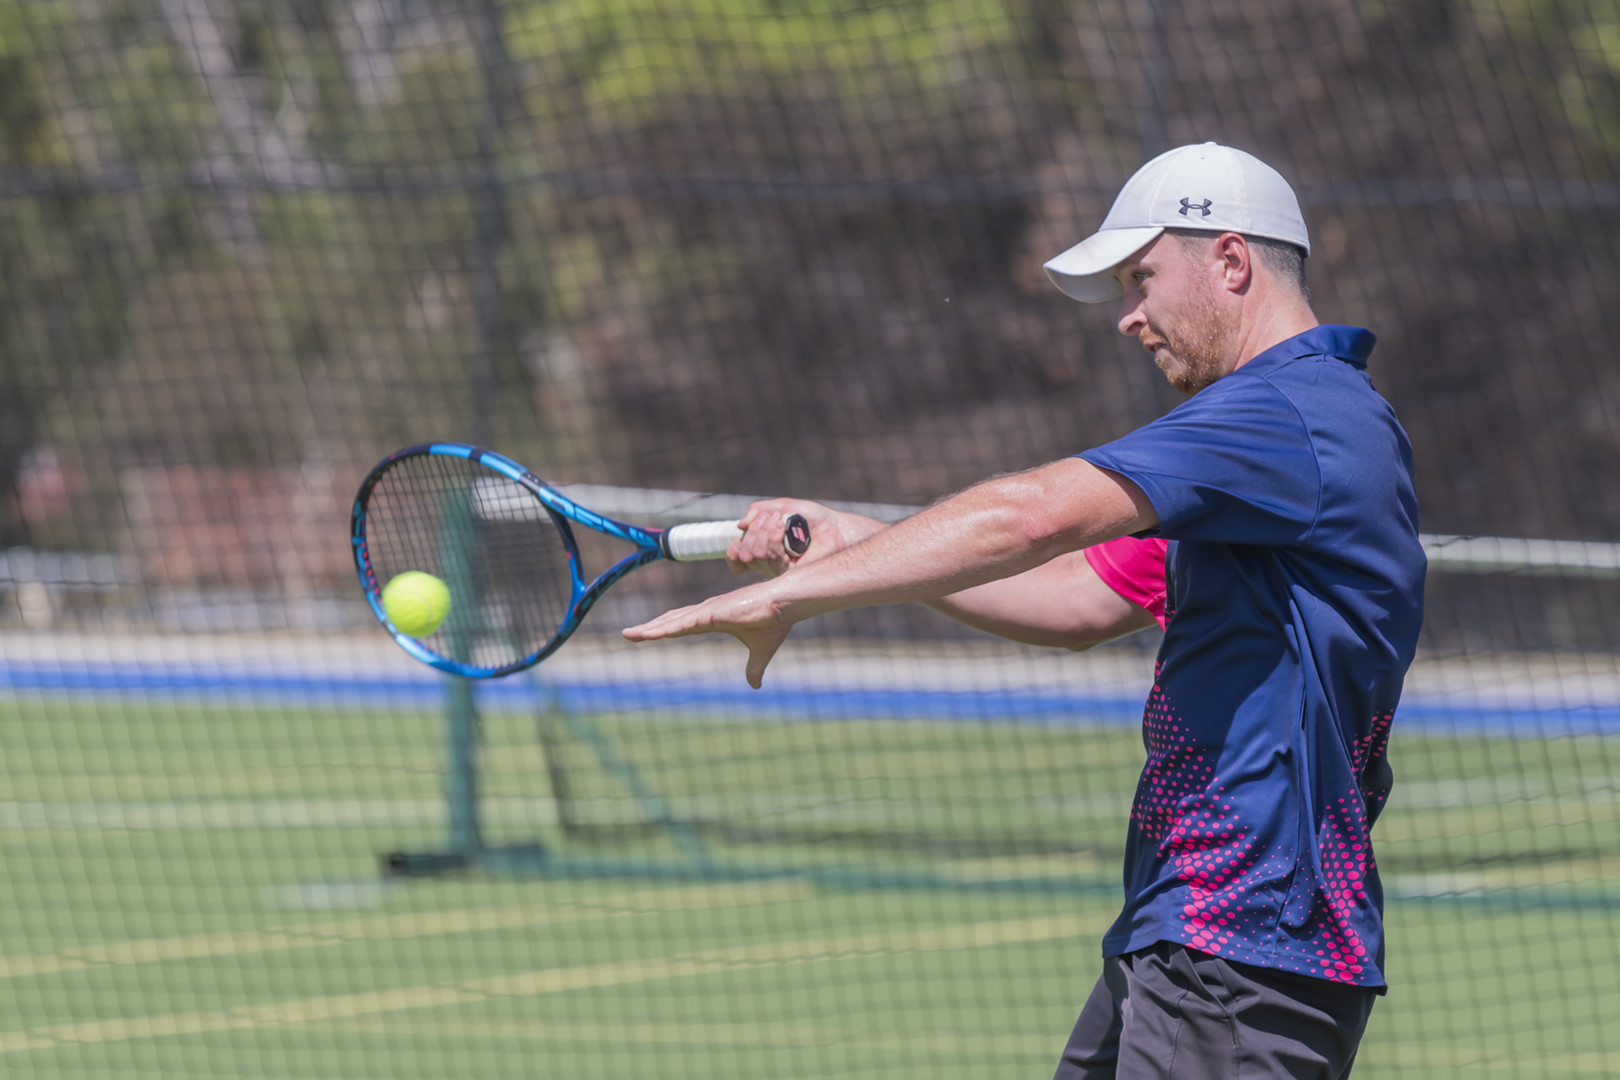 Simon Bardell won his three sets for the day.